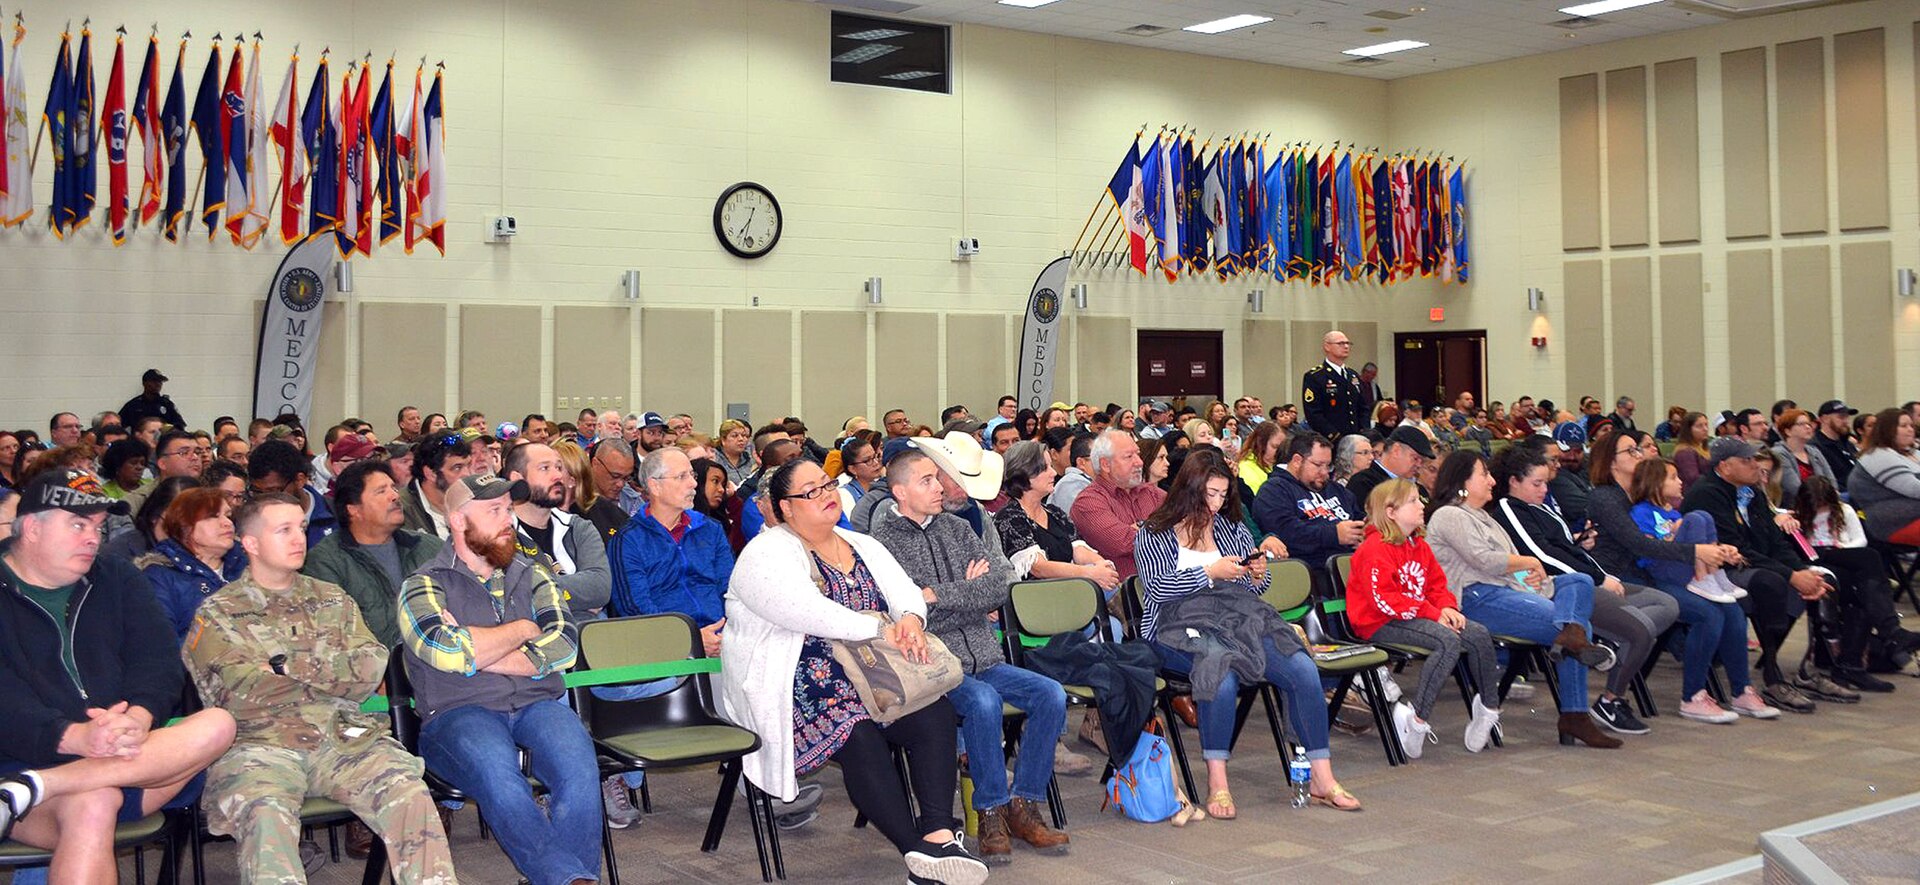 Mission Thanksgiving 2019 was declared a success, as more than 300 community members volunteered to host more than 800 Soldiers from the U.S. Army Medical Center of Excellence at Joint Base San Antonio-Fort Sam Houston Nov. 28.